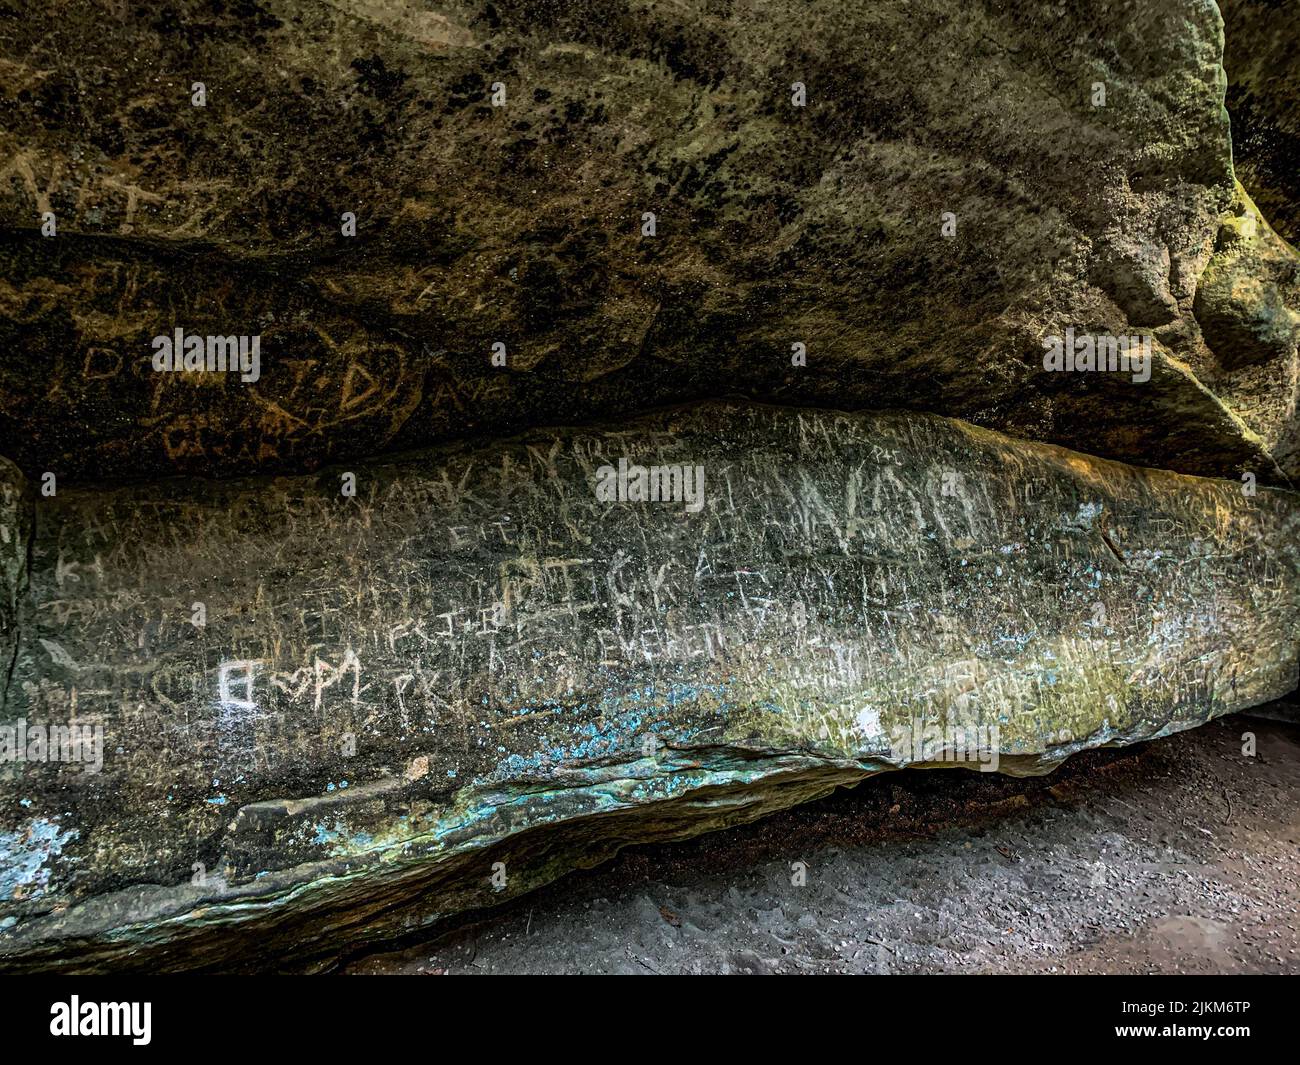 A closeup of the piece of a big rock with writings on it Stock Photo